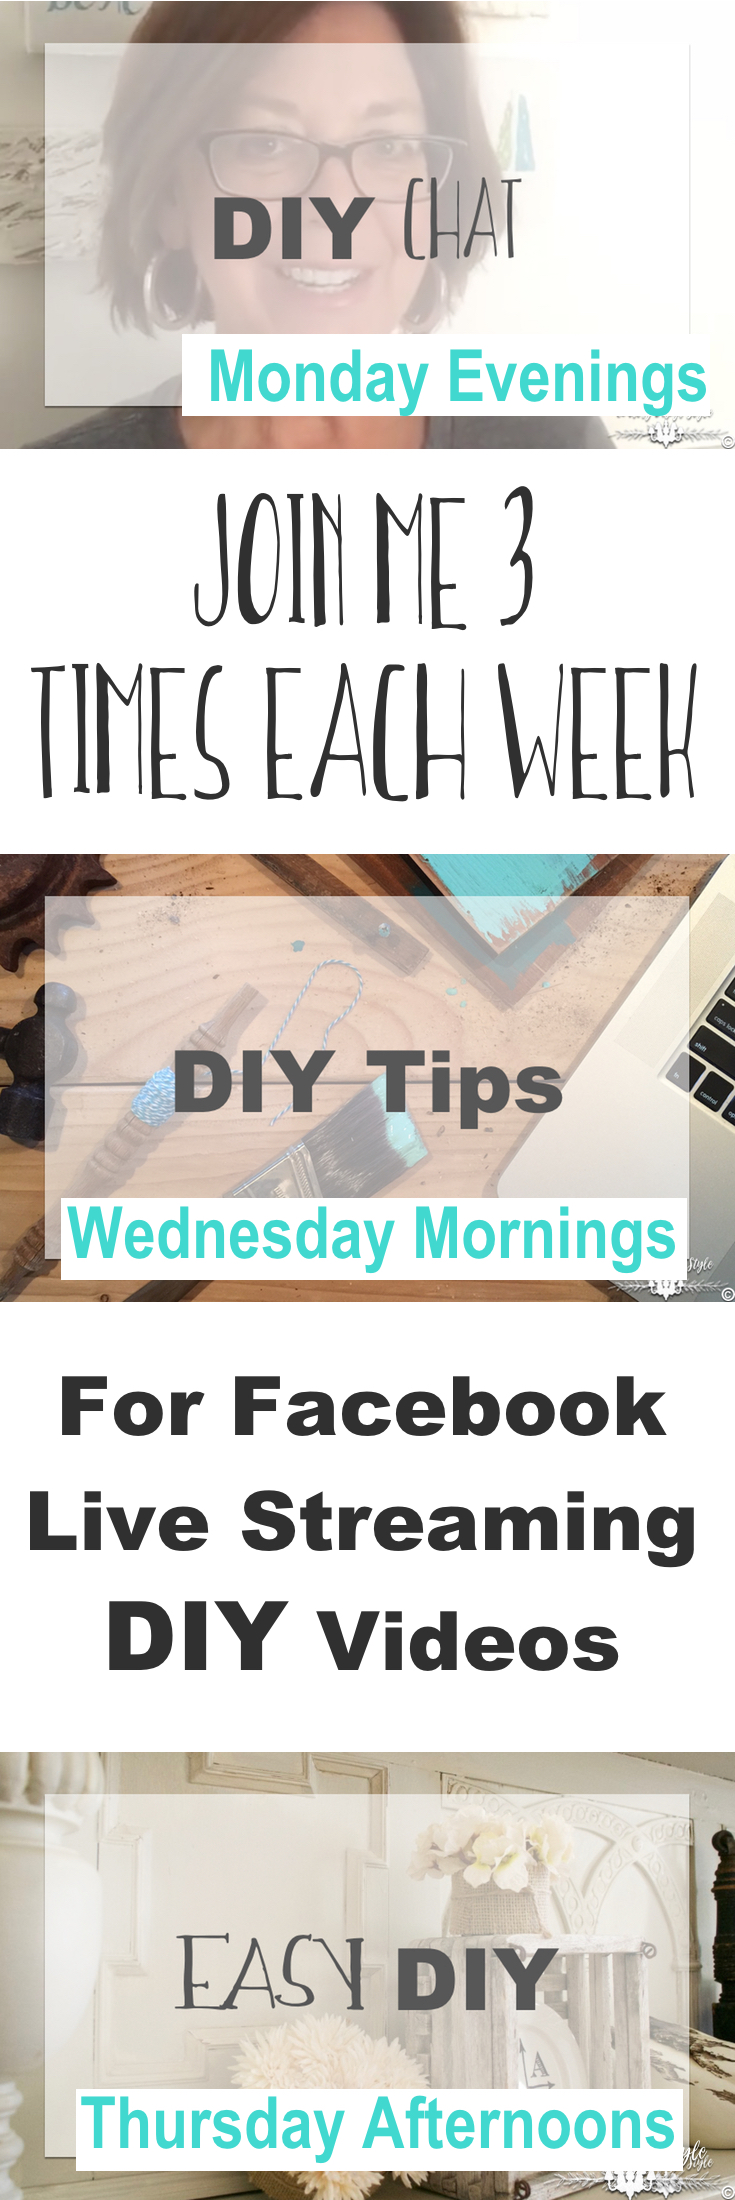 Facebook-live-DIY-videos-3-times-weekly | Country Design Style | countrydesignstyle.com